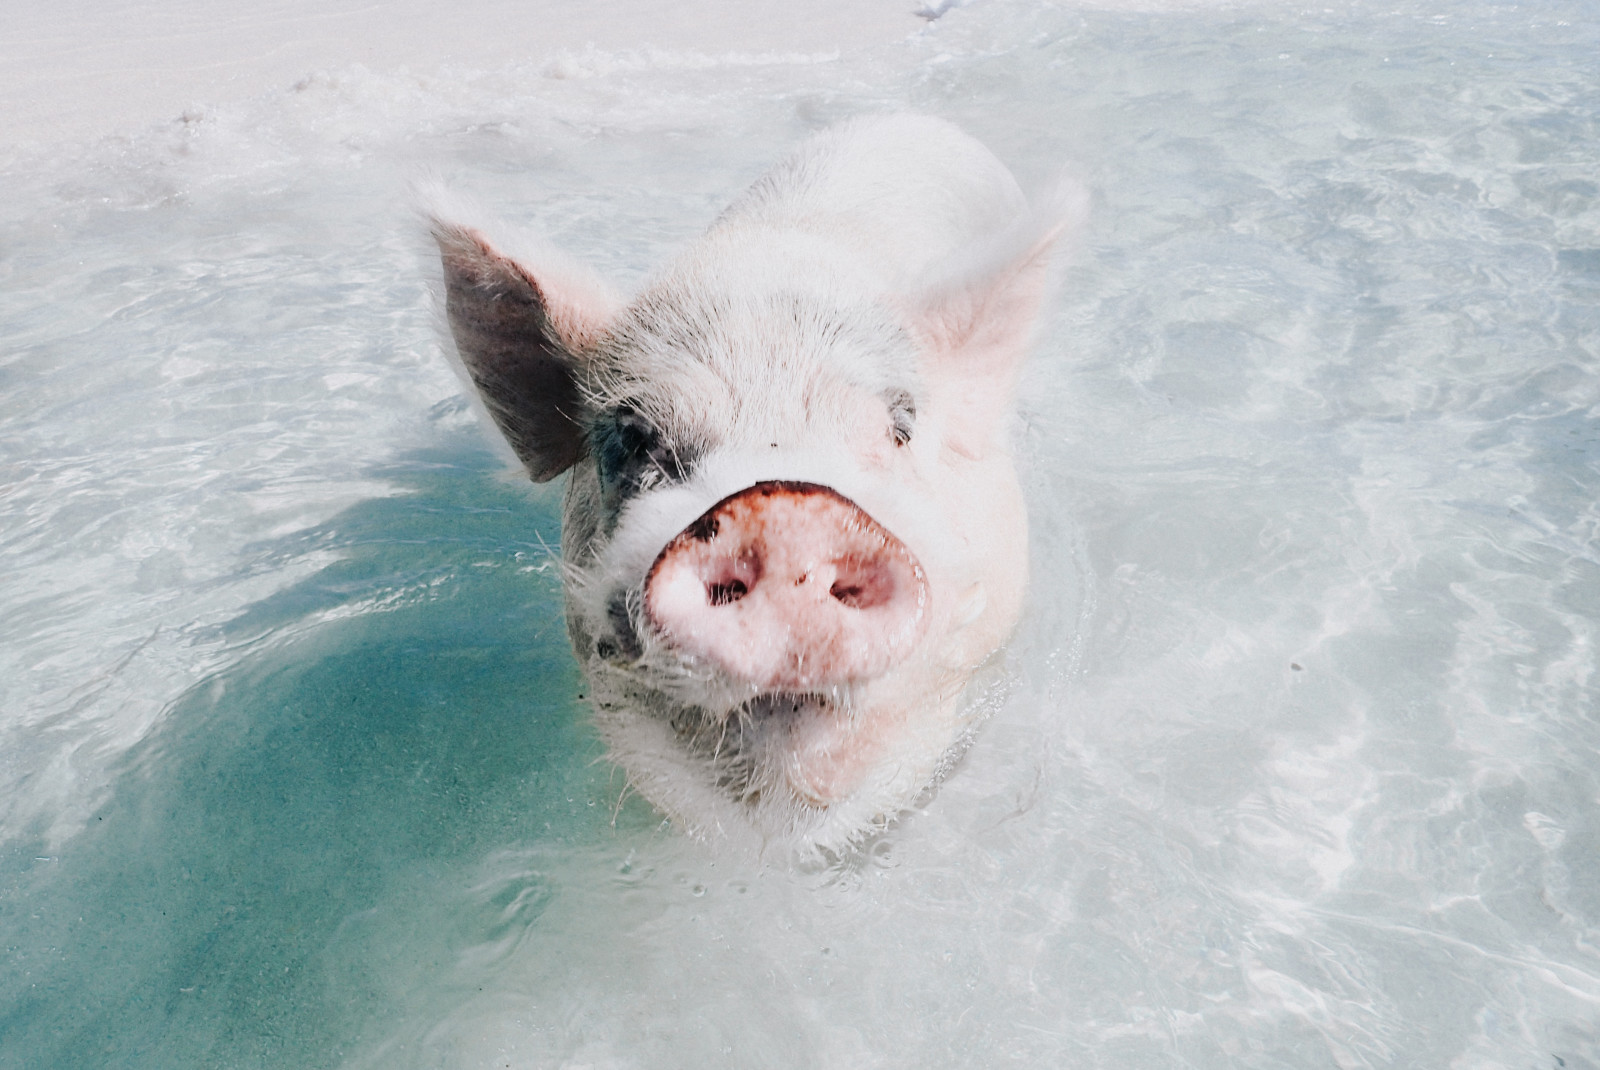 Pig swimming in the water on Pig Beach in the Bahamas